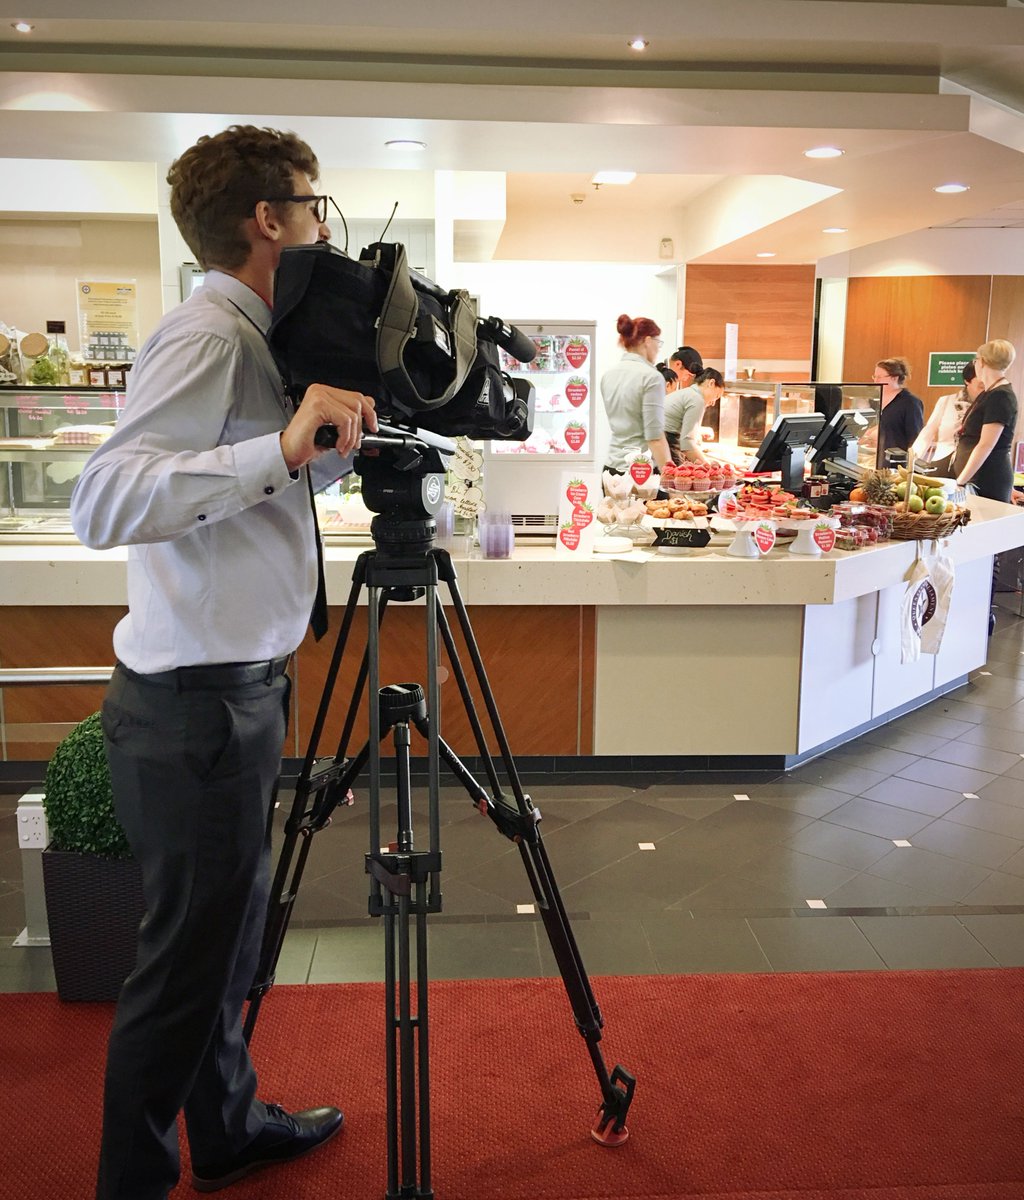 The ABC came to check out our amazing #QldStrawberry creations in the #ParliamentCafe today. Do you love #QldStrawberries as much as we do? #QueenslandParliament #SmashaStrawb #StrawberryGrowers #StrawberryWeek